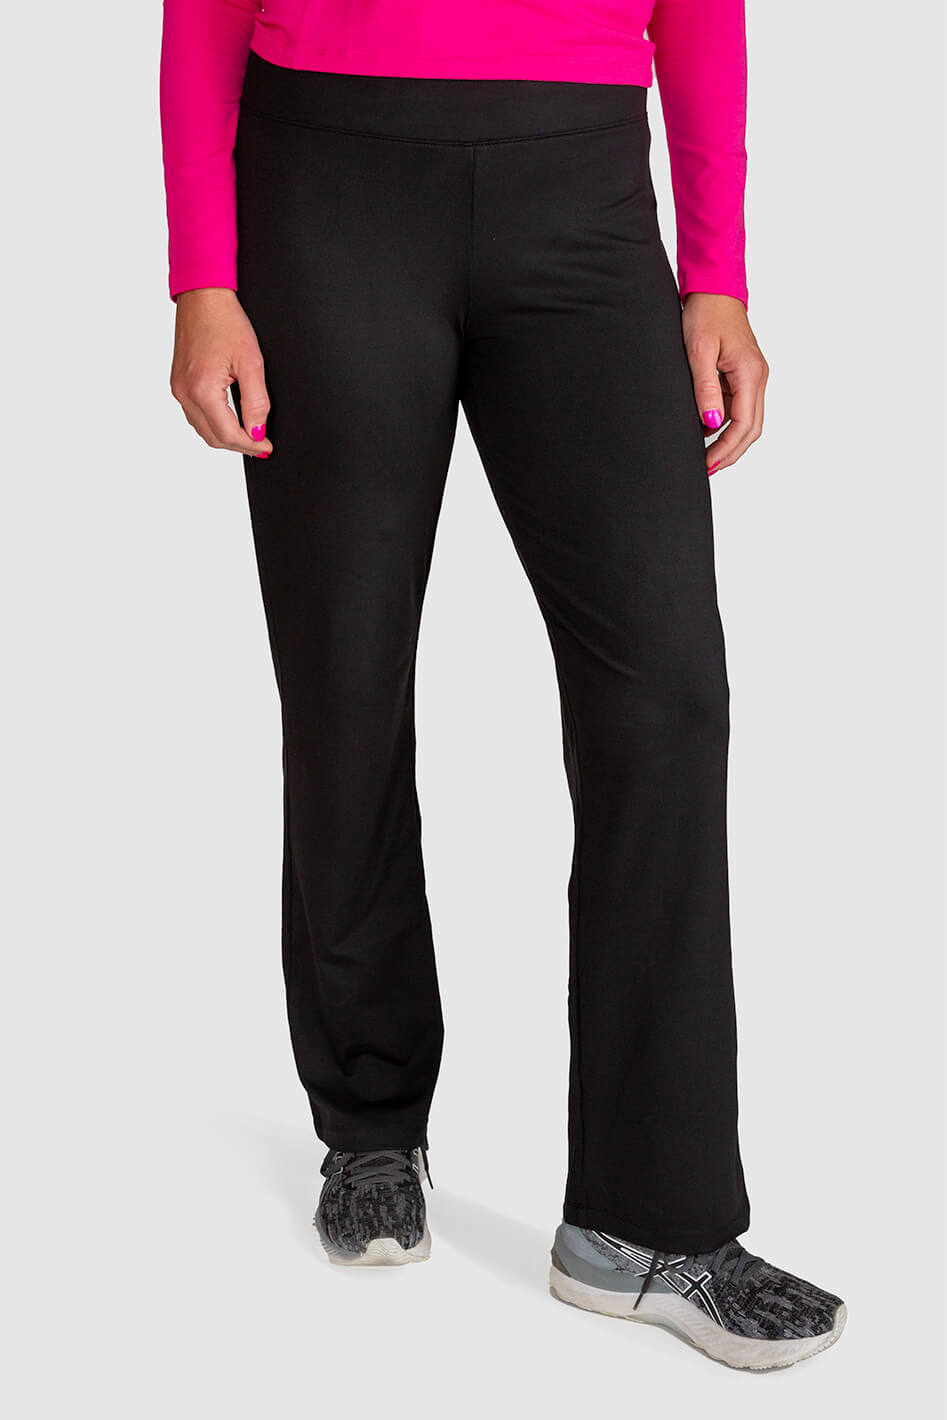 Everyday Active Pant has yoga pants styling